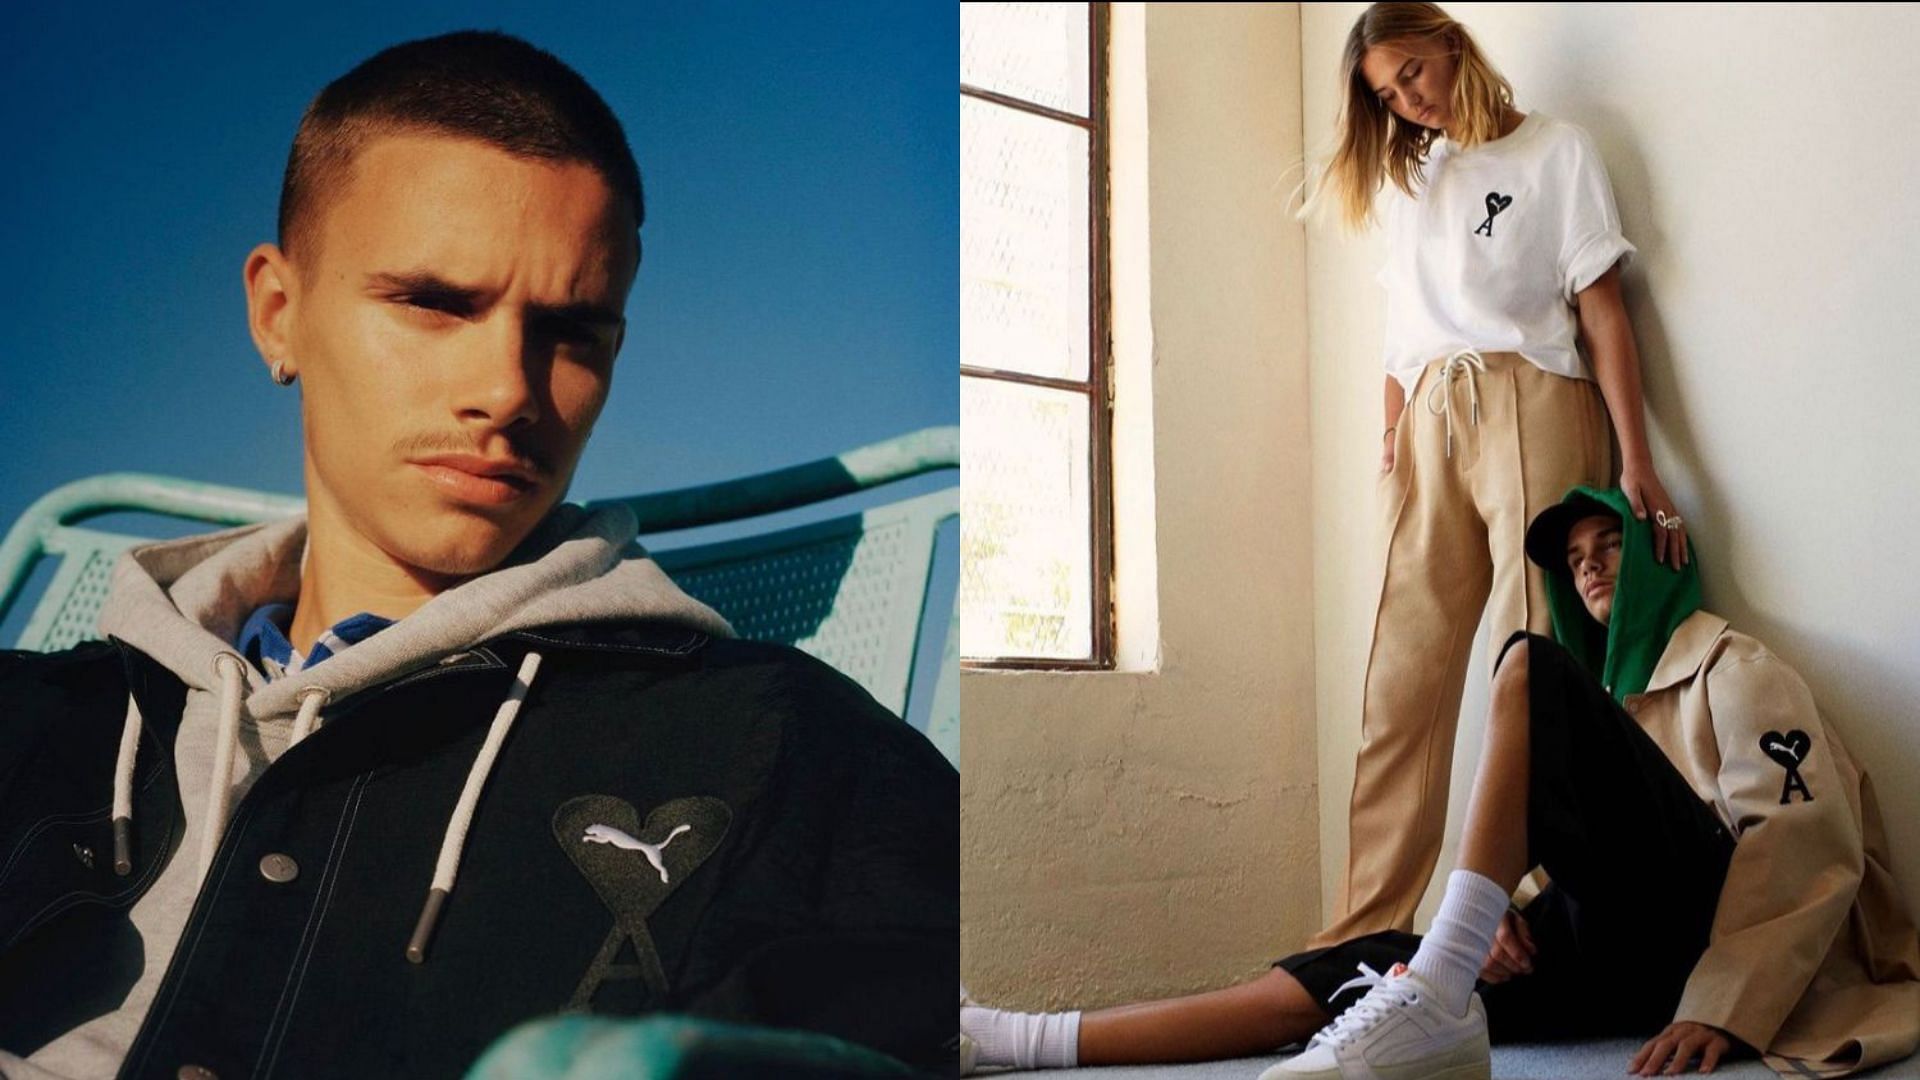 PUMA is all set to launch its latest collection in collaboration with AMI (Images via alexandremattiussi9/Instagram)